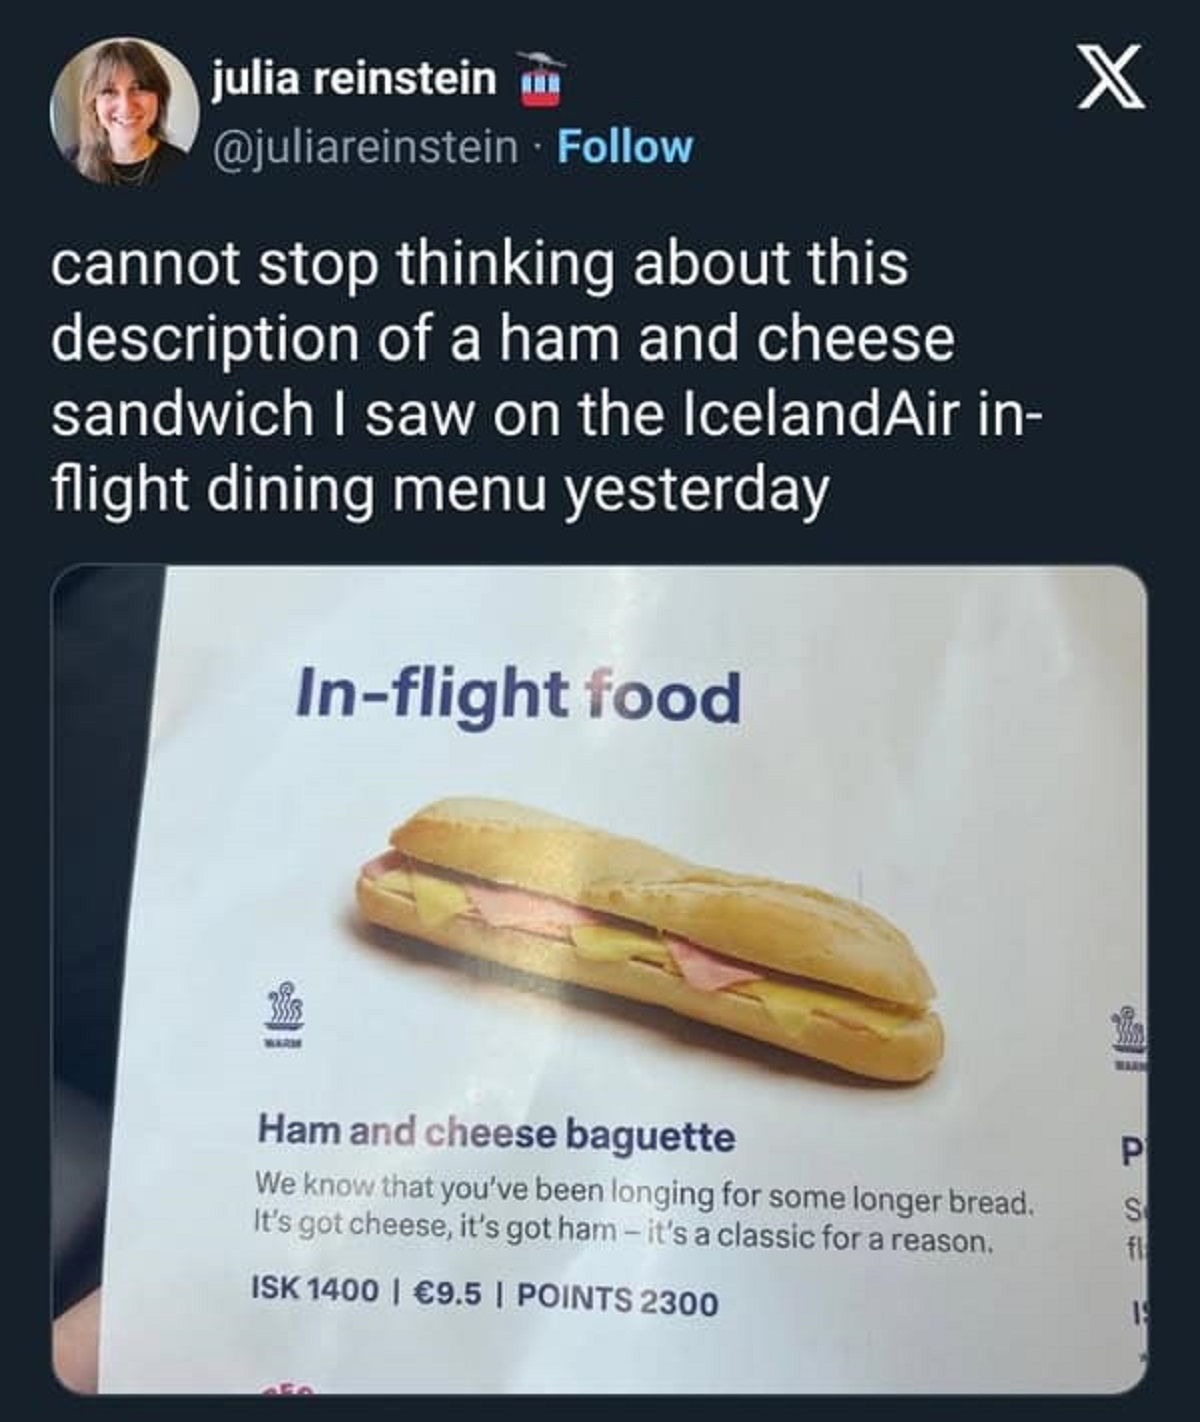 bánh - julia reinstein m cannot stop thinking about this description of a ham and cheese sandwich I saw on the IcelandAir in flight dining menu yesterday Inflight food X Warm Ham and cheese baguette We know that you've been longing for some longer bread. 